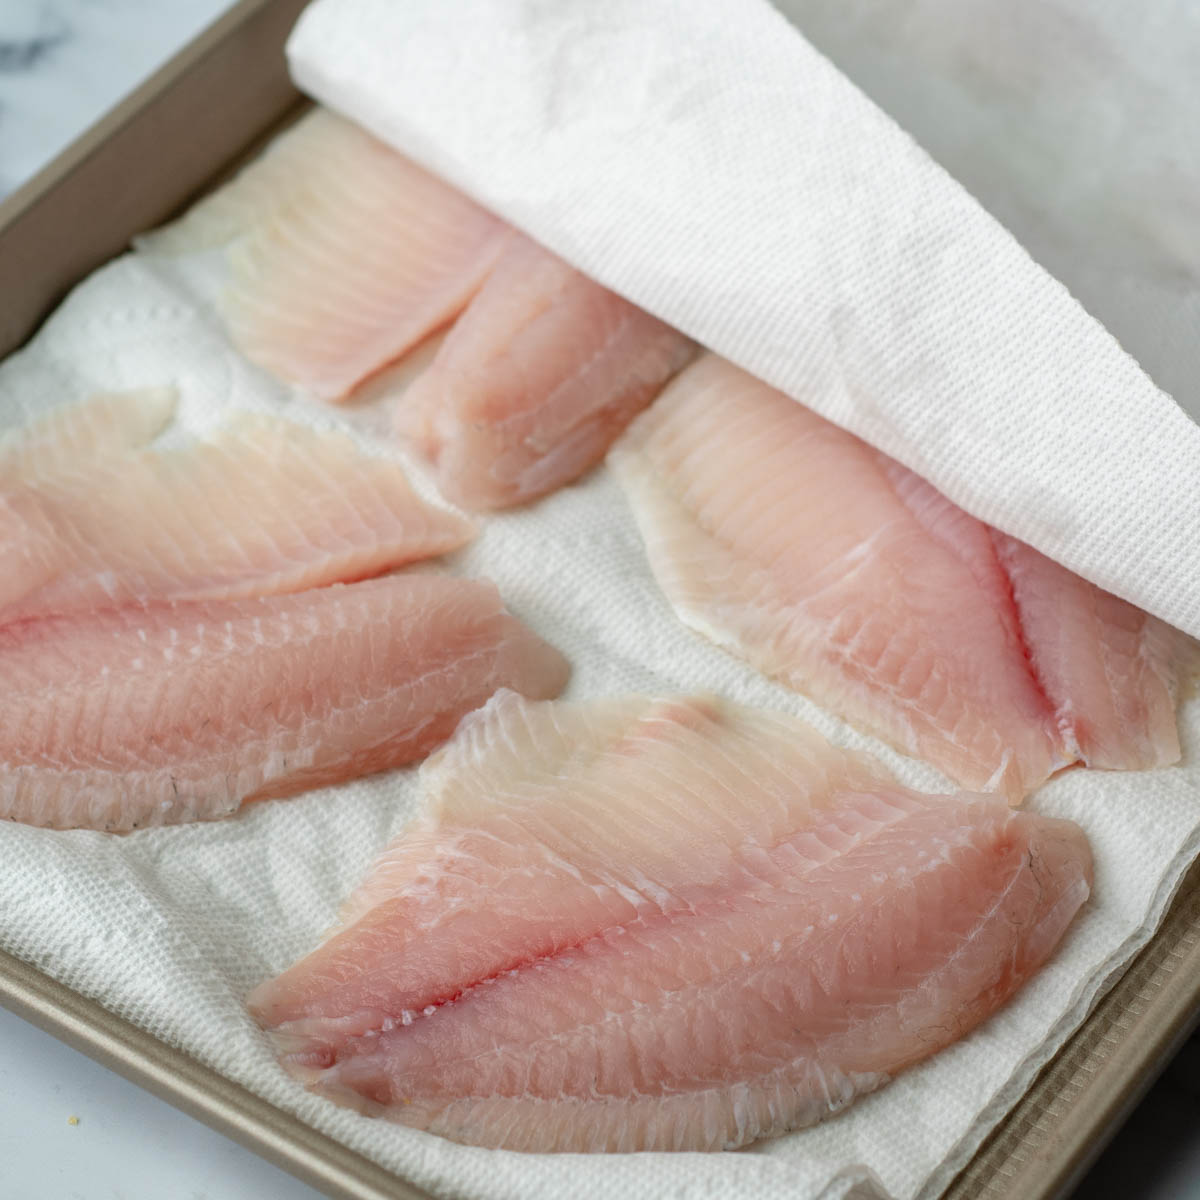 tilapia fillets blotted dry with paper towels.